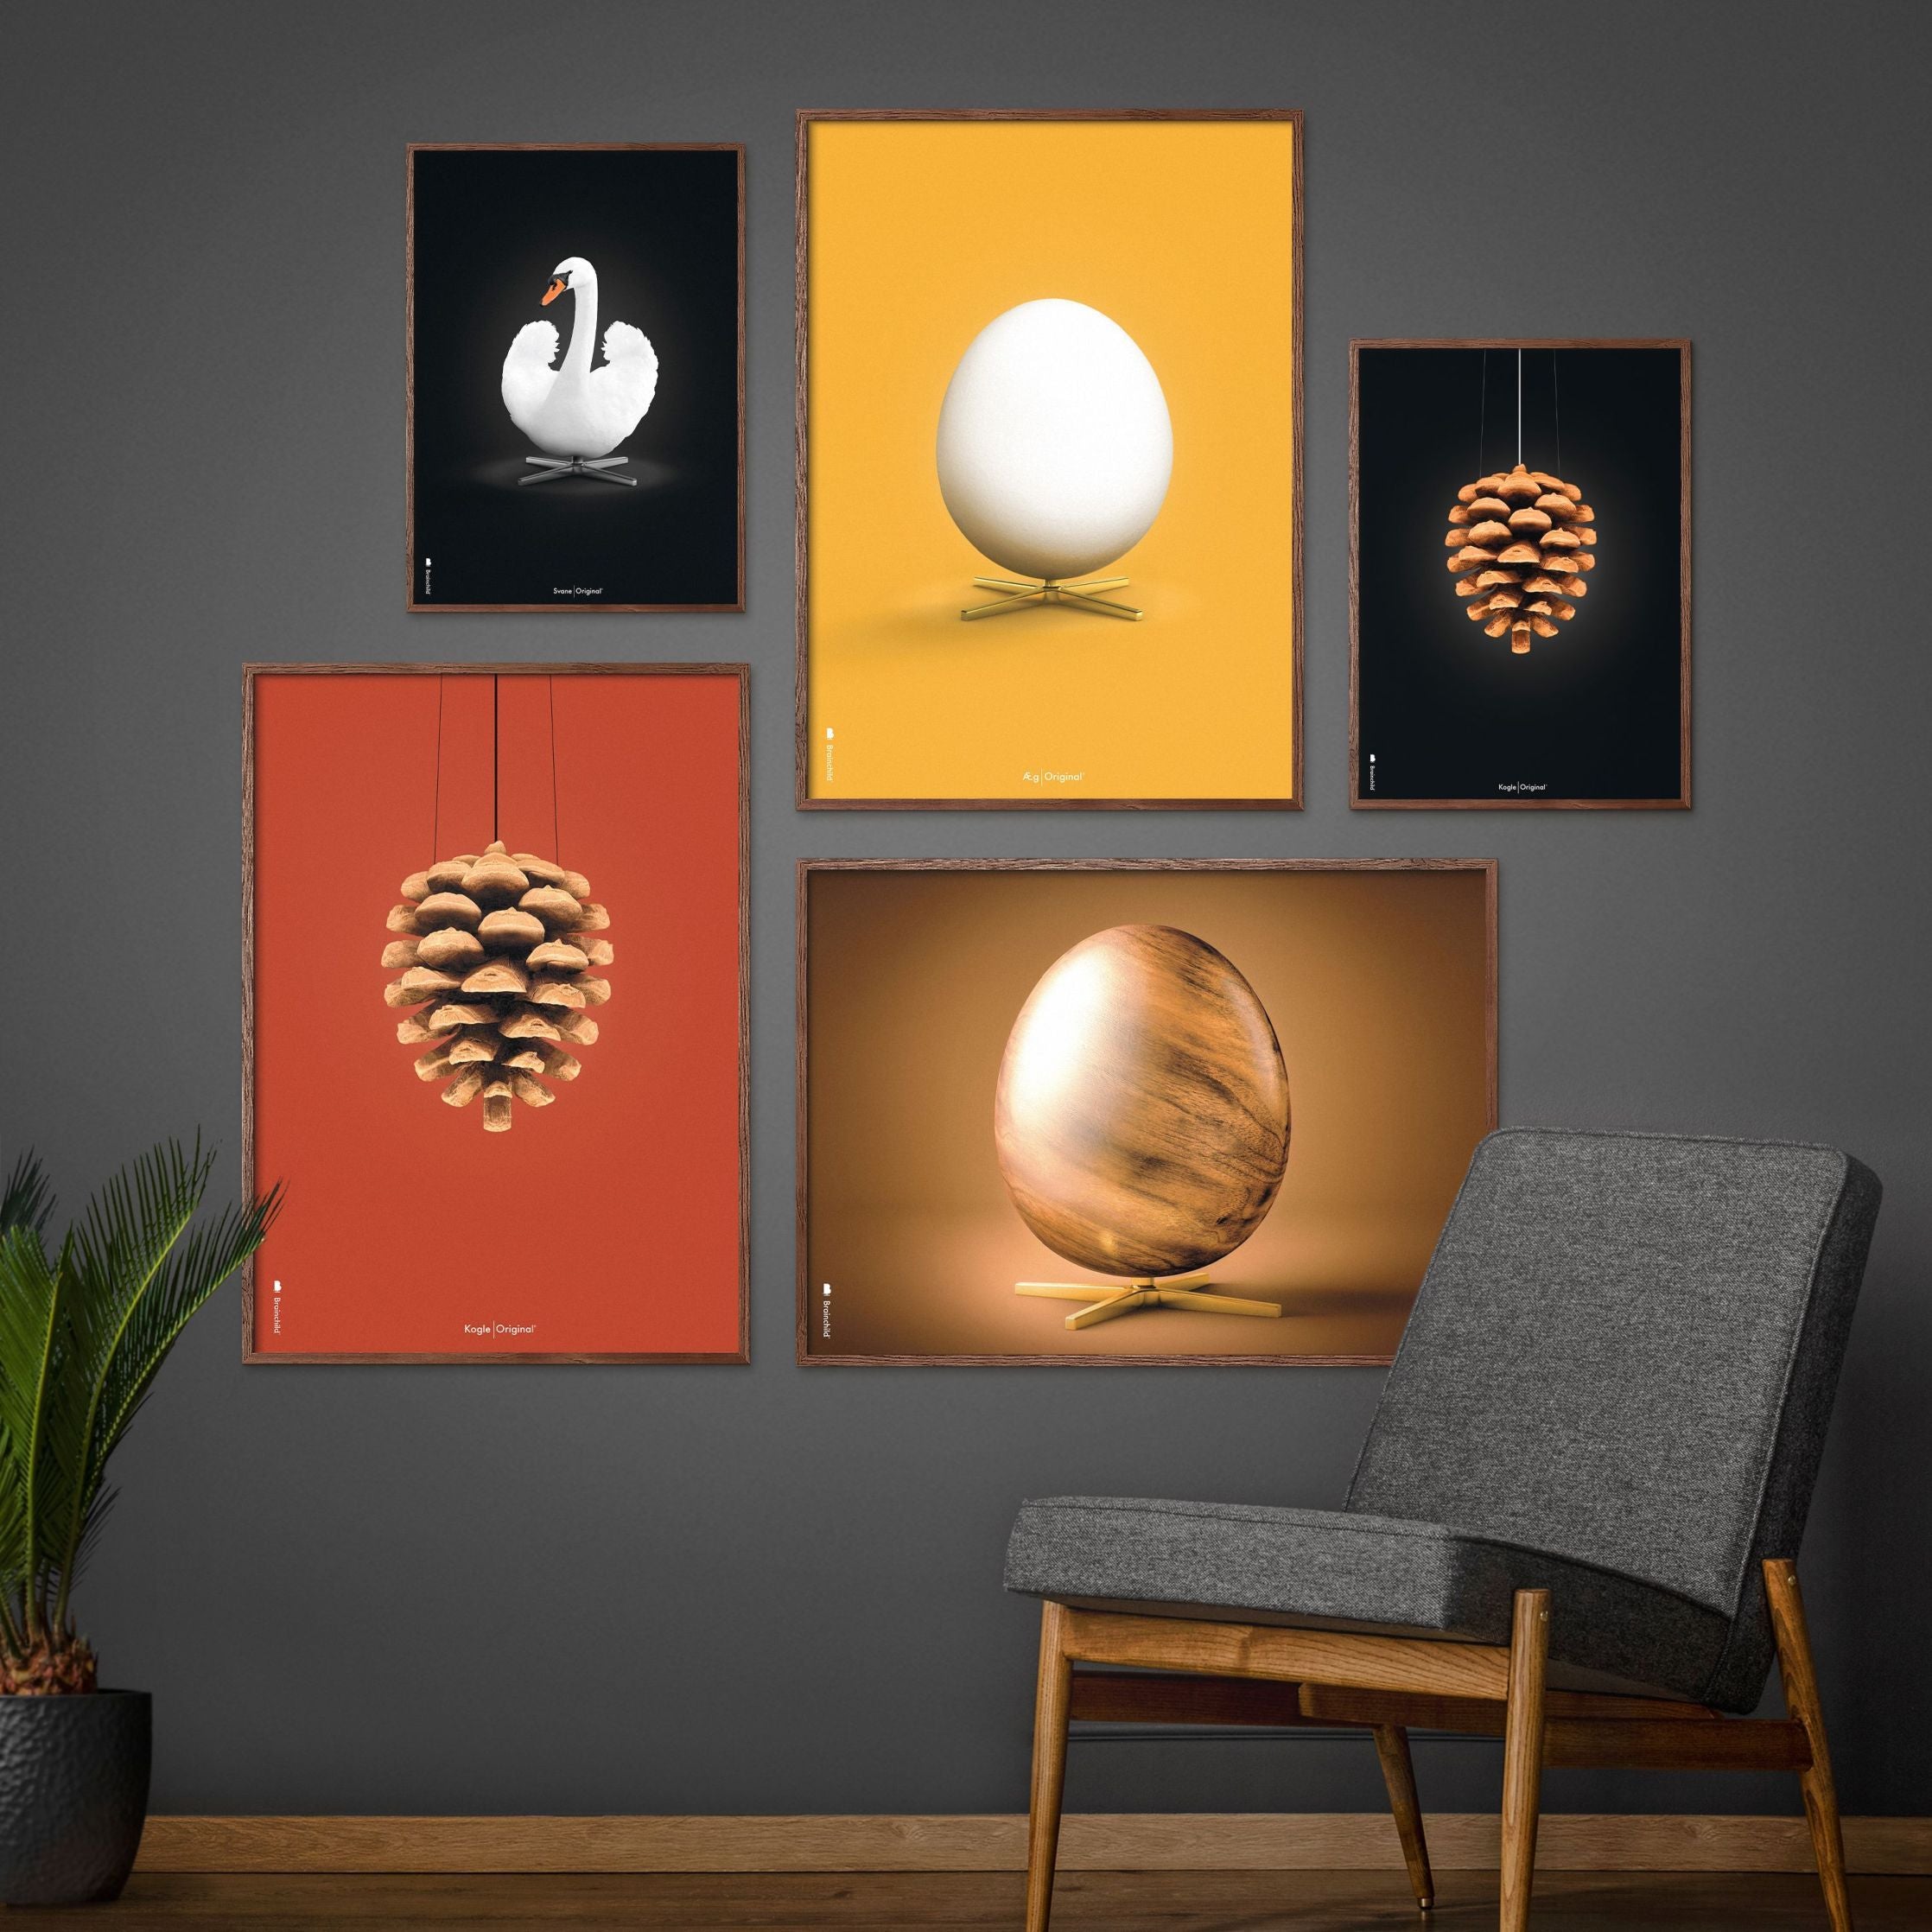 Brainchild Egg Classic Poster, Frame In Black Lacquered Wood 30x40 Cm, Yellow Background